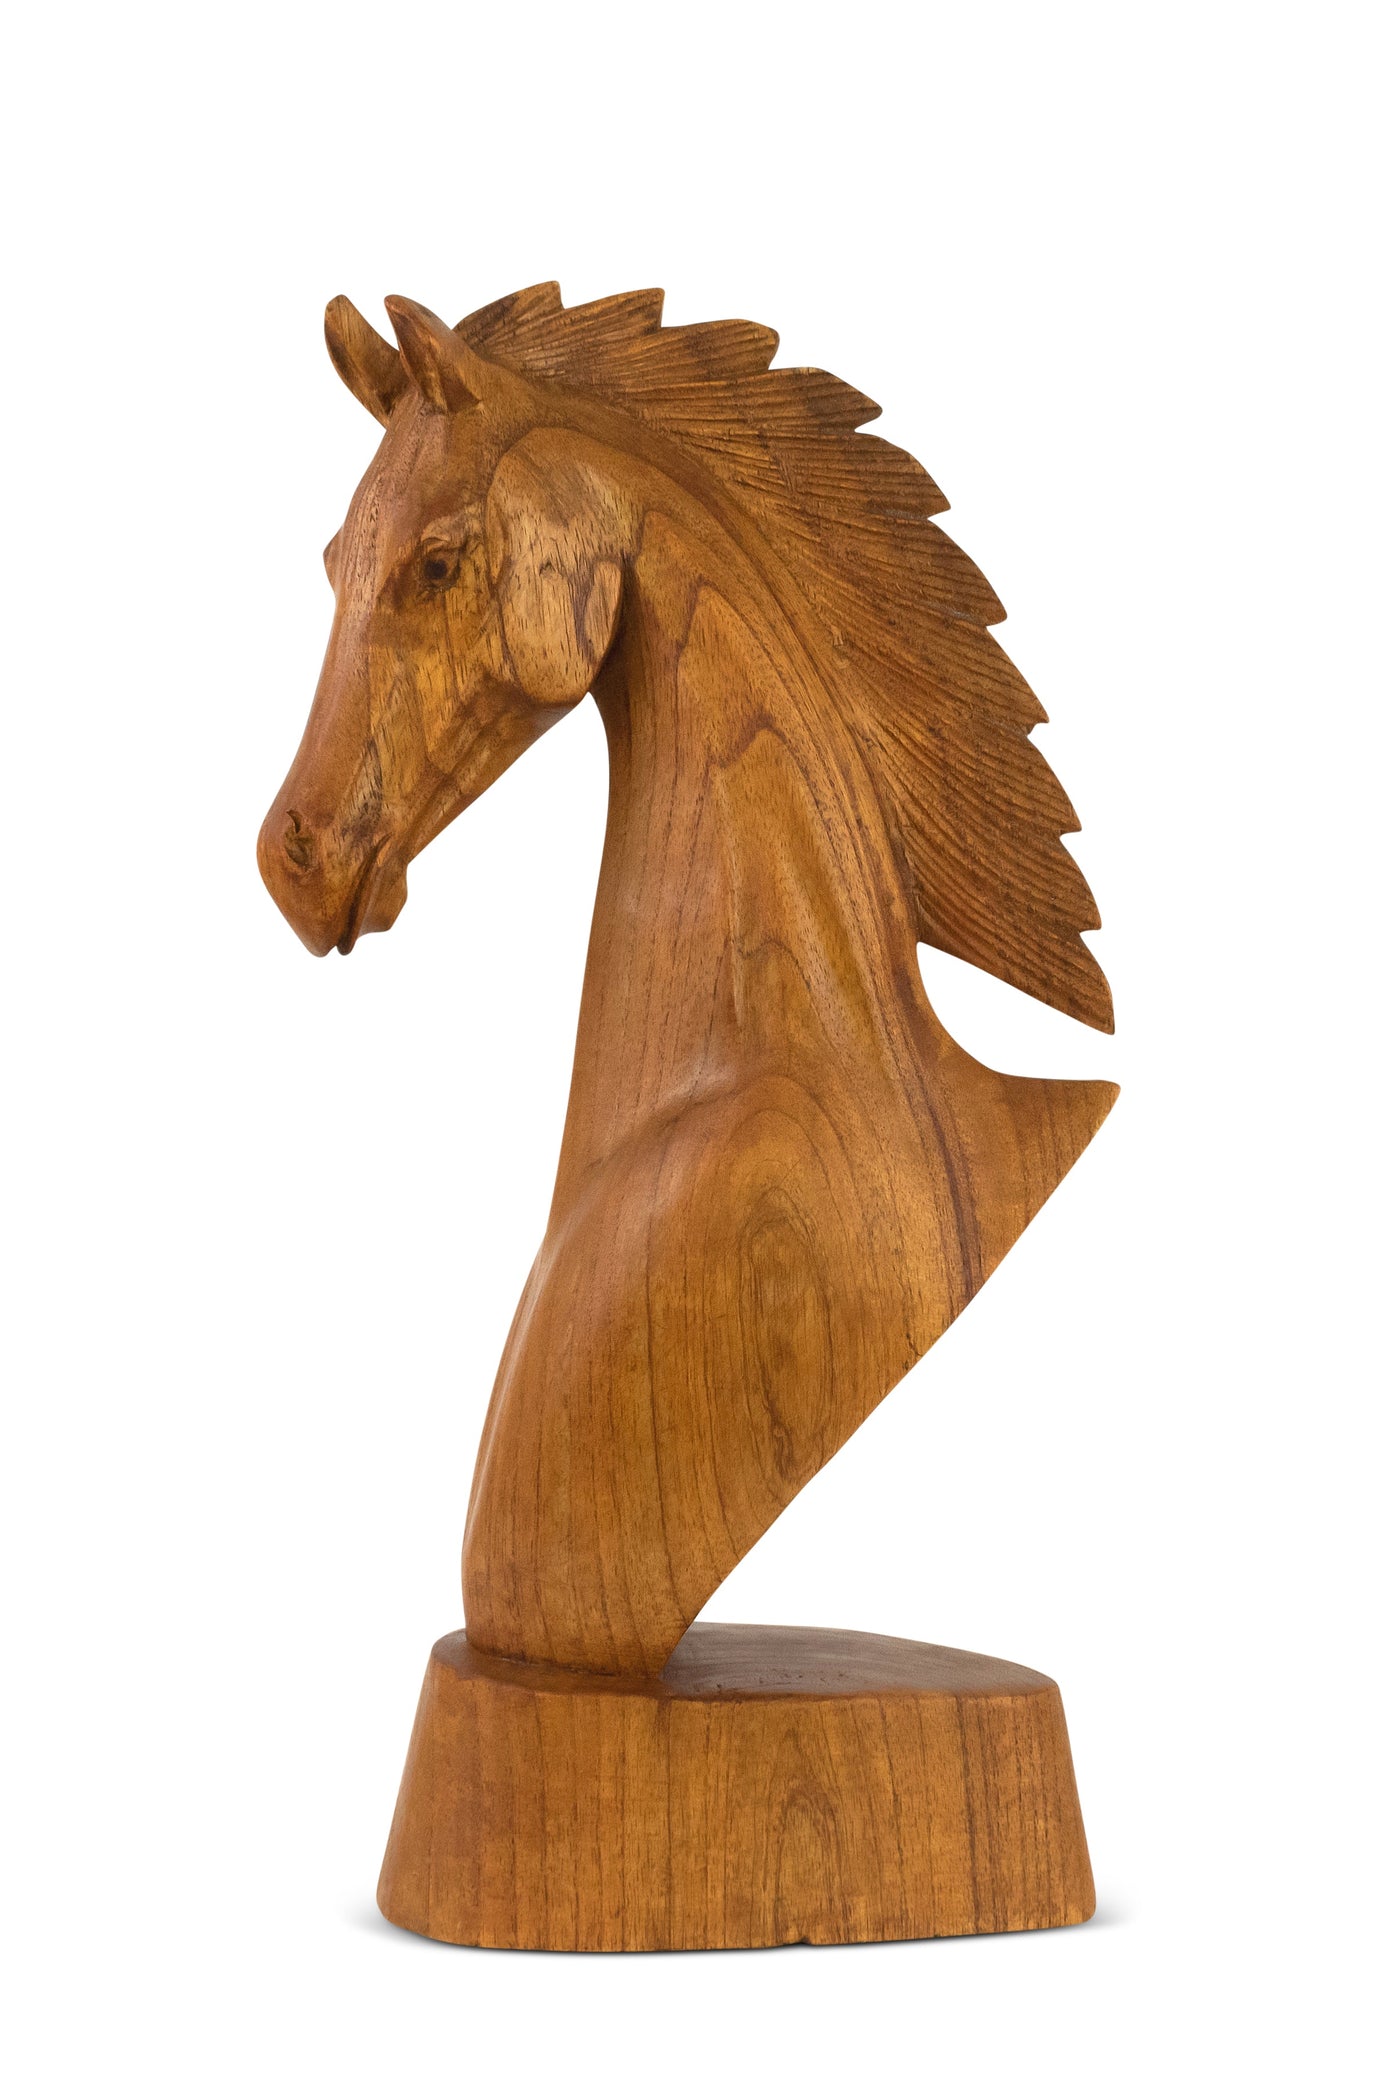 Wooden Hand Carved Horse Head Statue Sculpture Handcrafted Handmade Wood Decorative Home Decor Accent Decoration